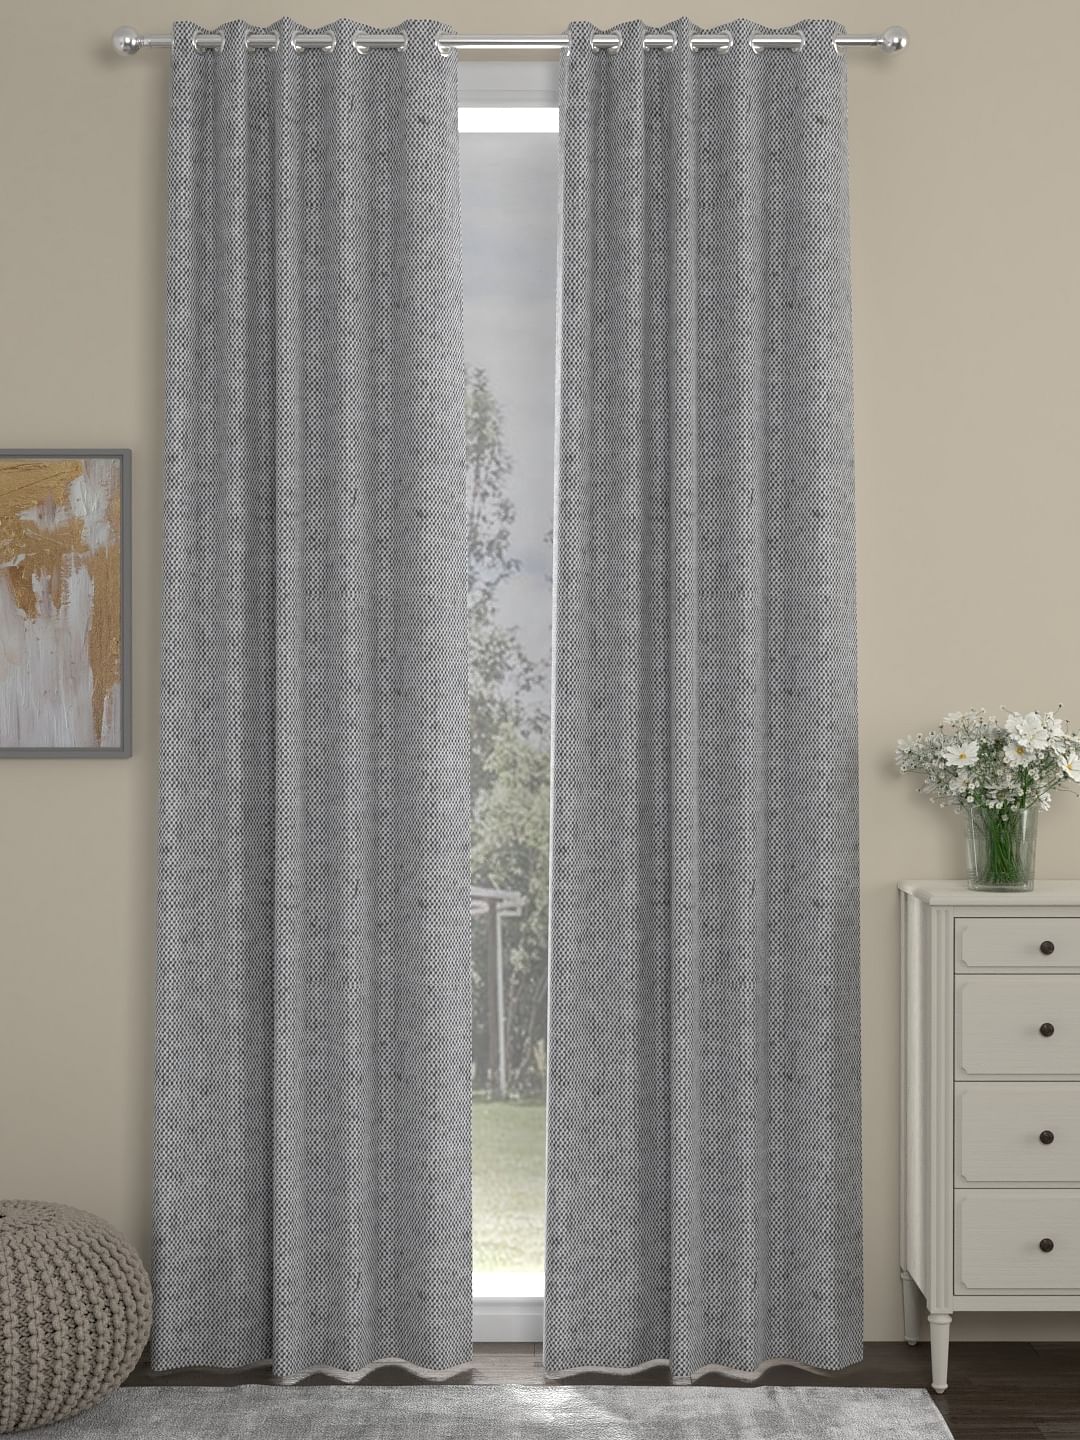 Rosara Home Polycotton Curtain in Grey Colour